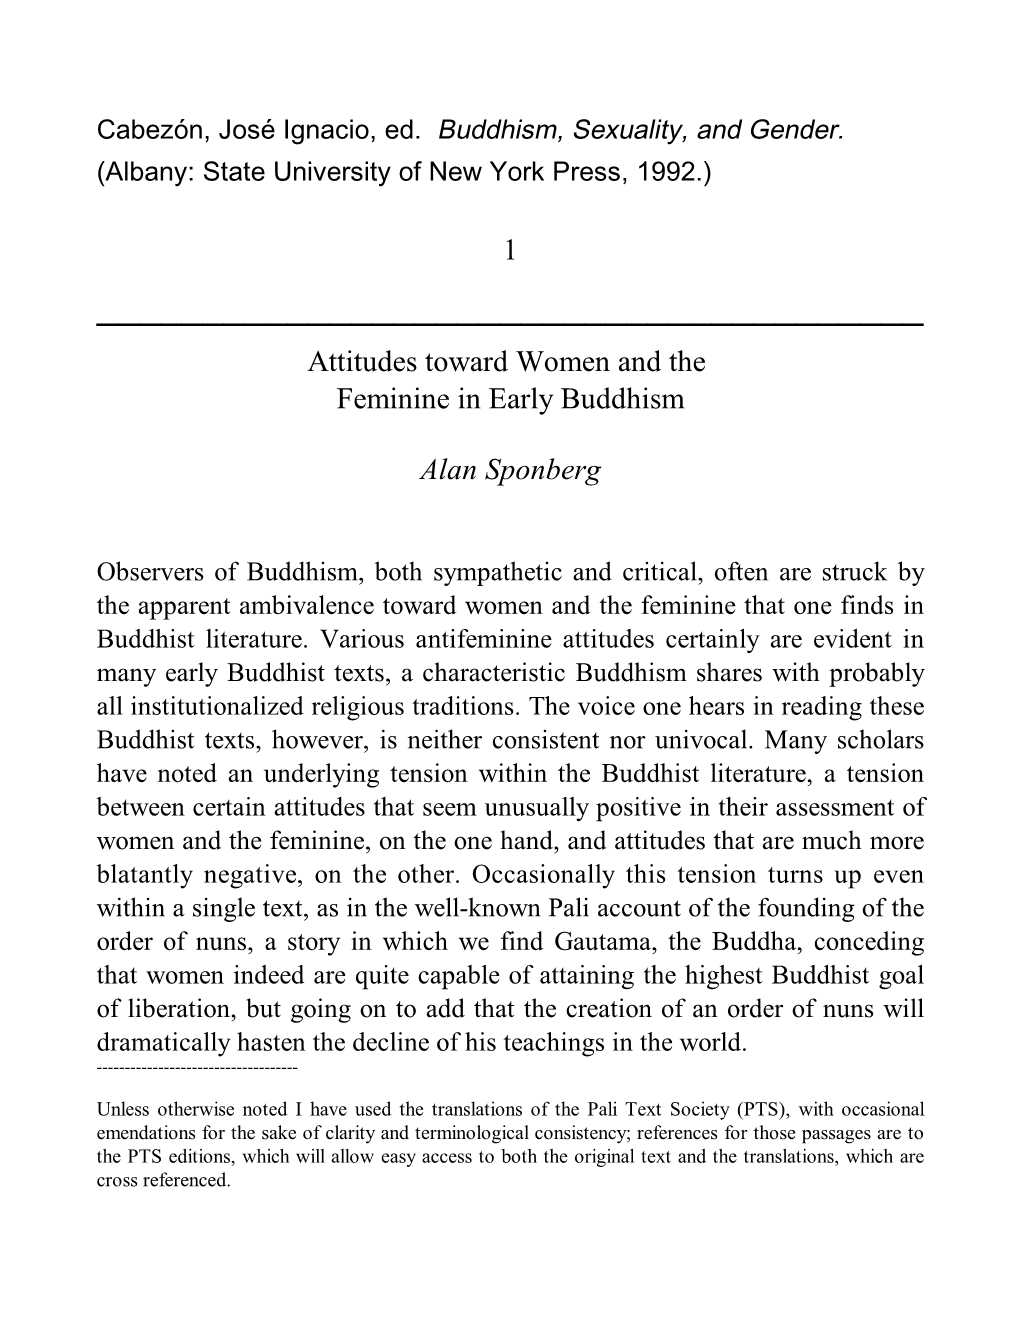 Attitudes Toward Women and the Feminine in Early Buddhism